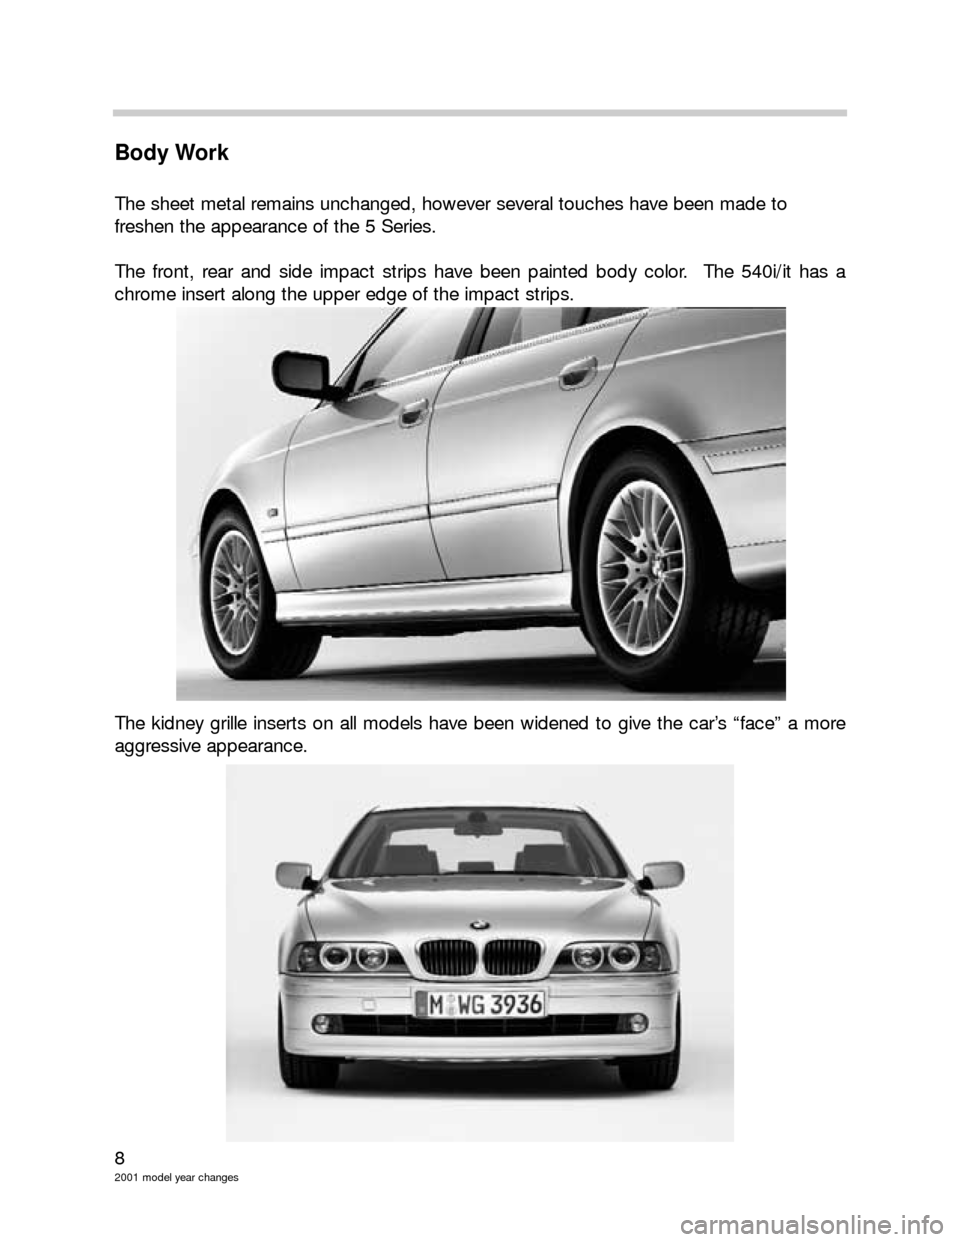 BMW 3 SERIES 2004 E46 Model Yar Changes 8
2001 model year changes
Body Work
The sheet metal remains unchanged, however several touches have been made to 
freshen the appearance of the 5 Series.
The front, rear and side impact strips have be